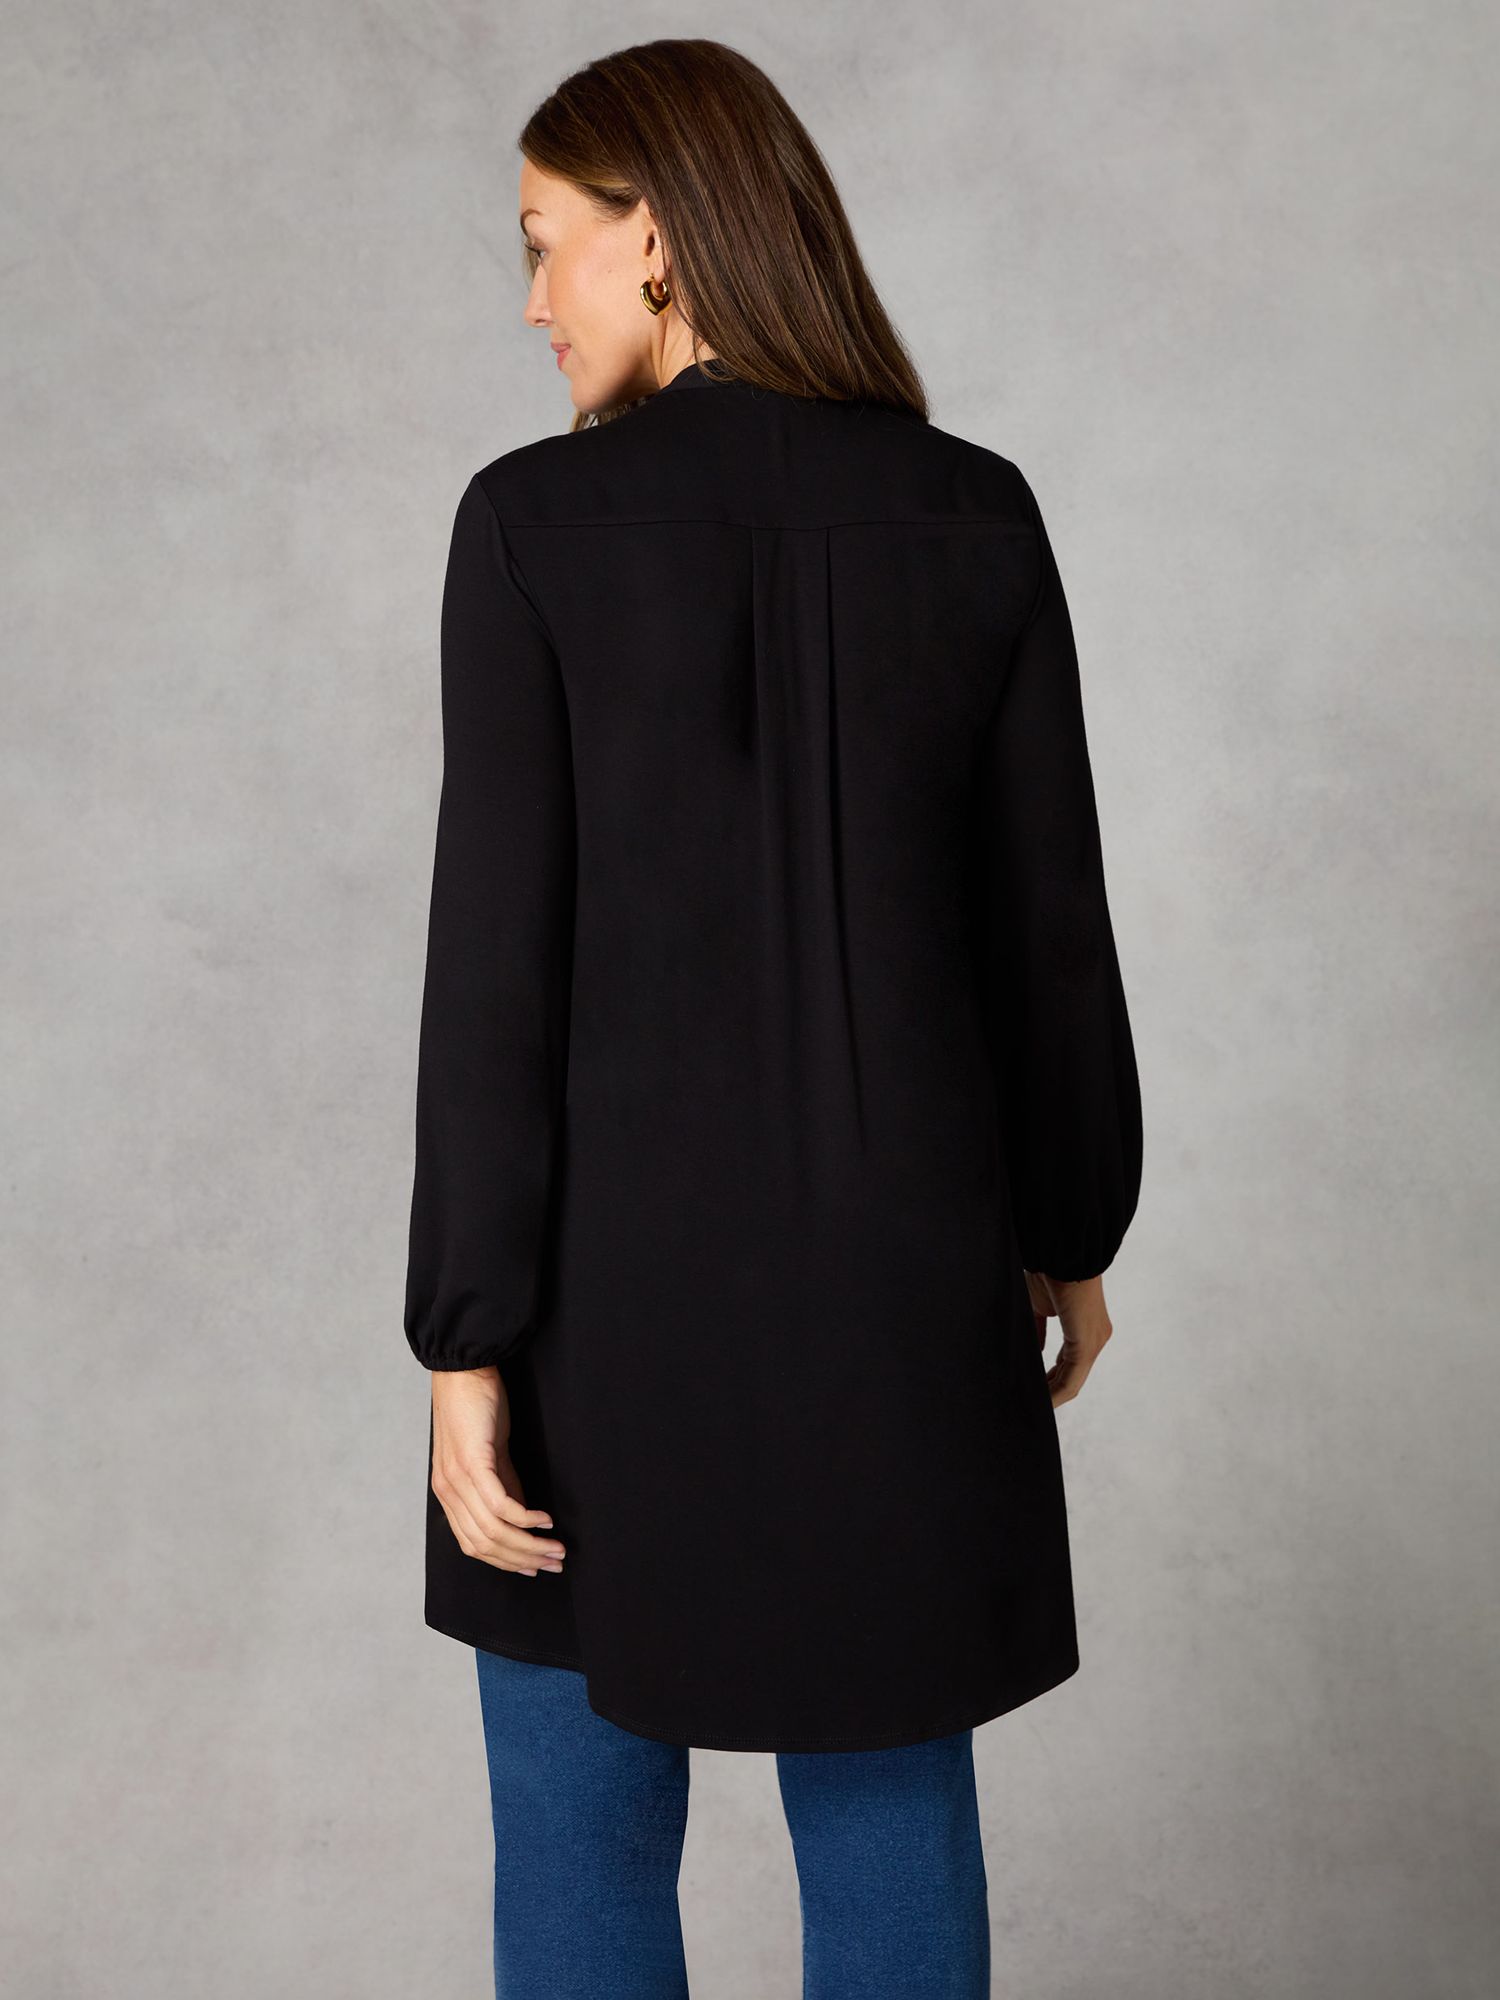 Buy Live Unlimited Curve Petite Pintuck Yoke Jersey Tunic Top, Black Online at johnlewis.com